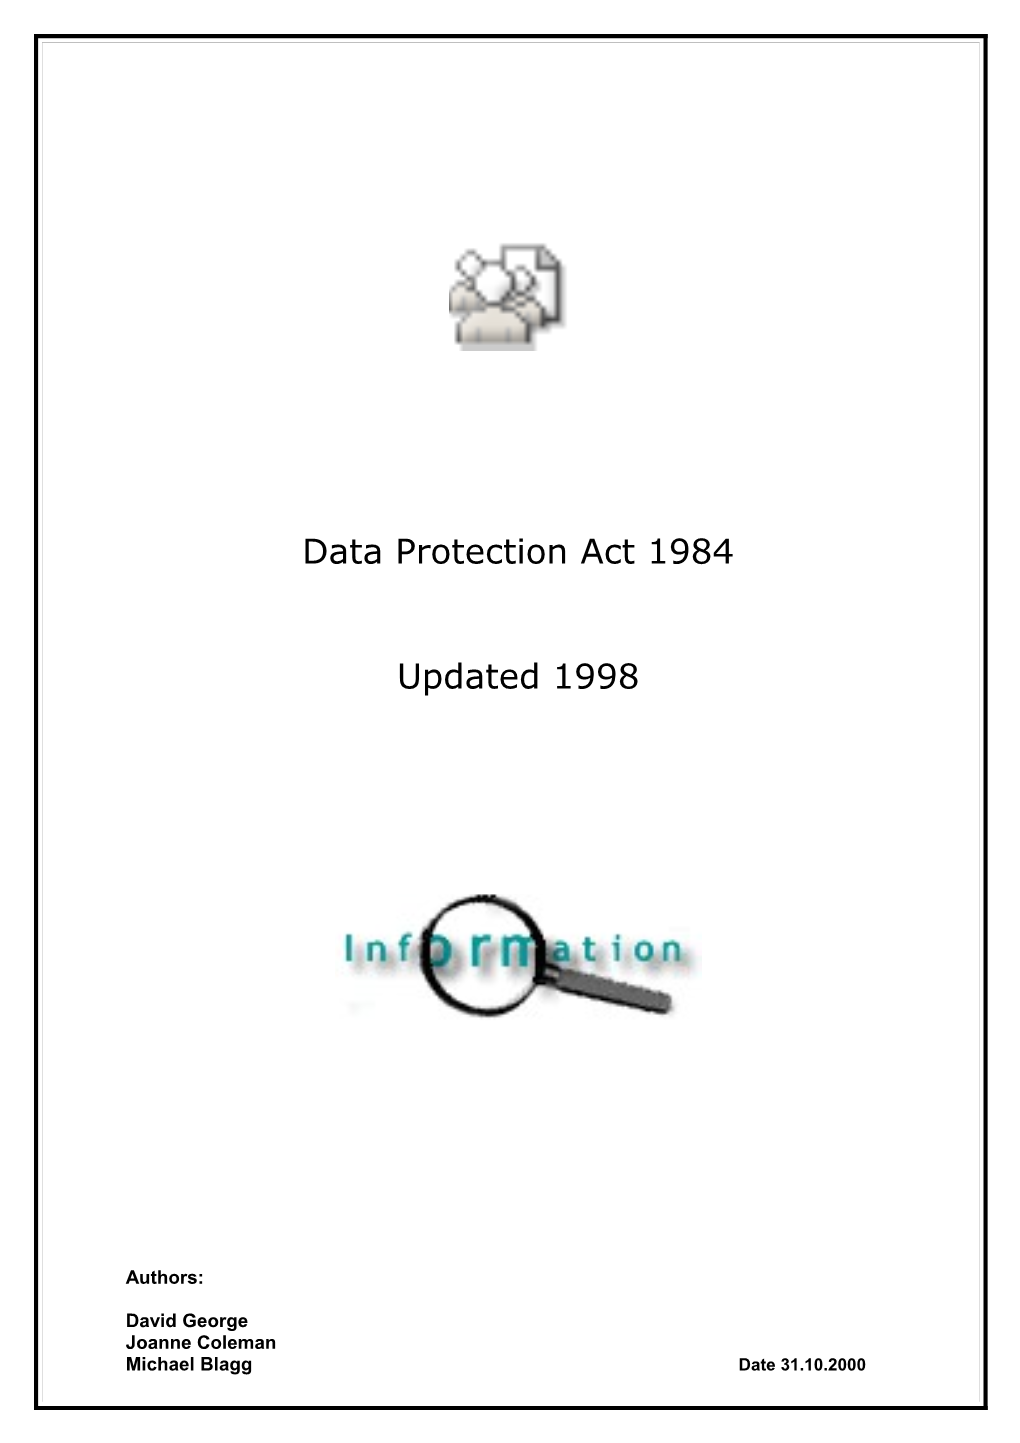 What Does the Data Protection Act Cover?